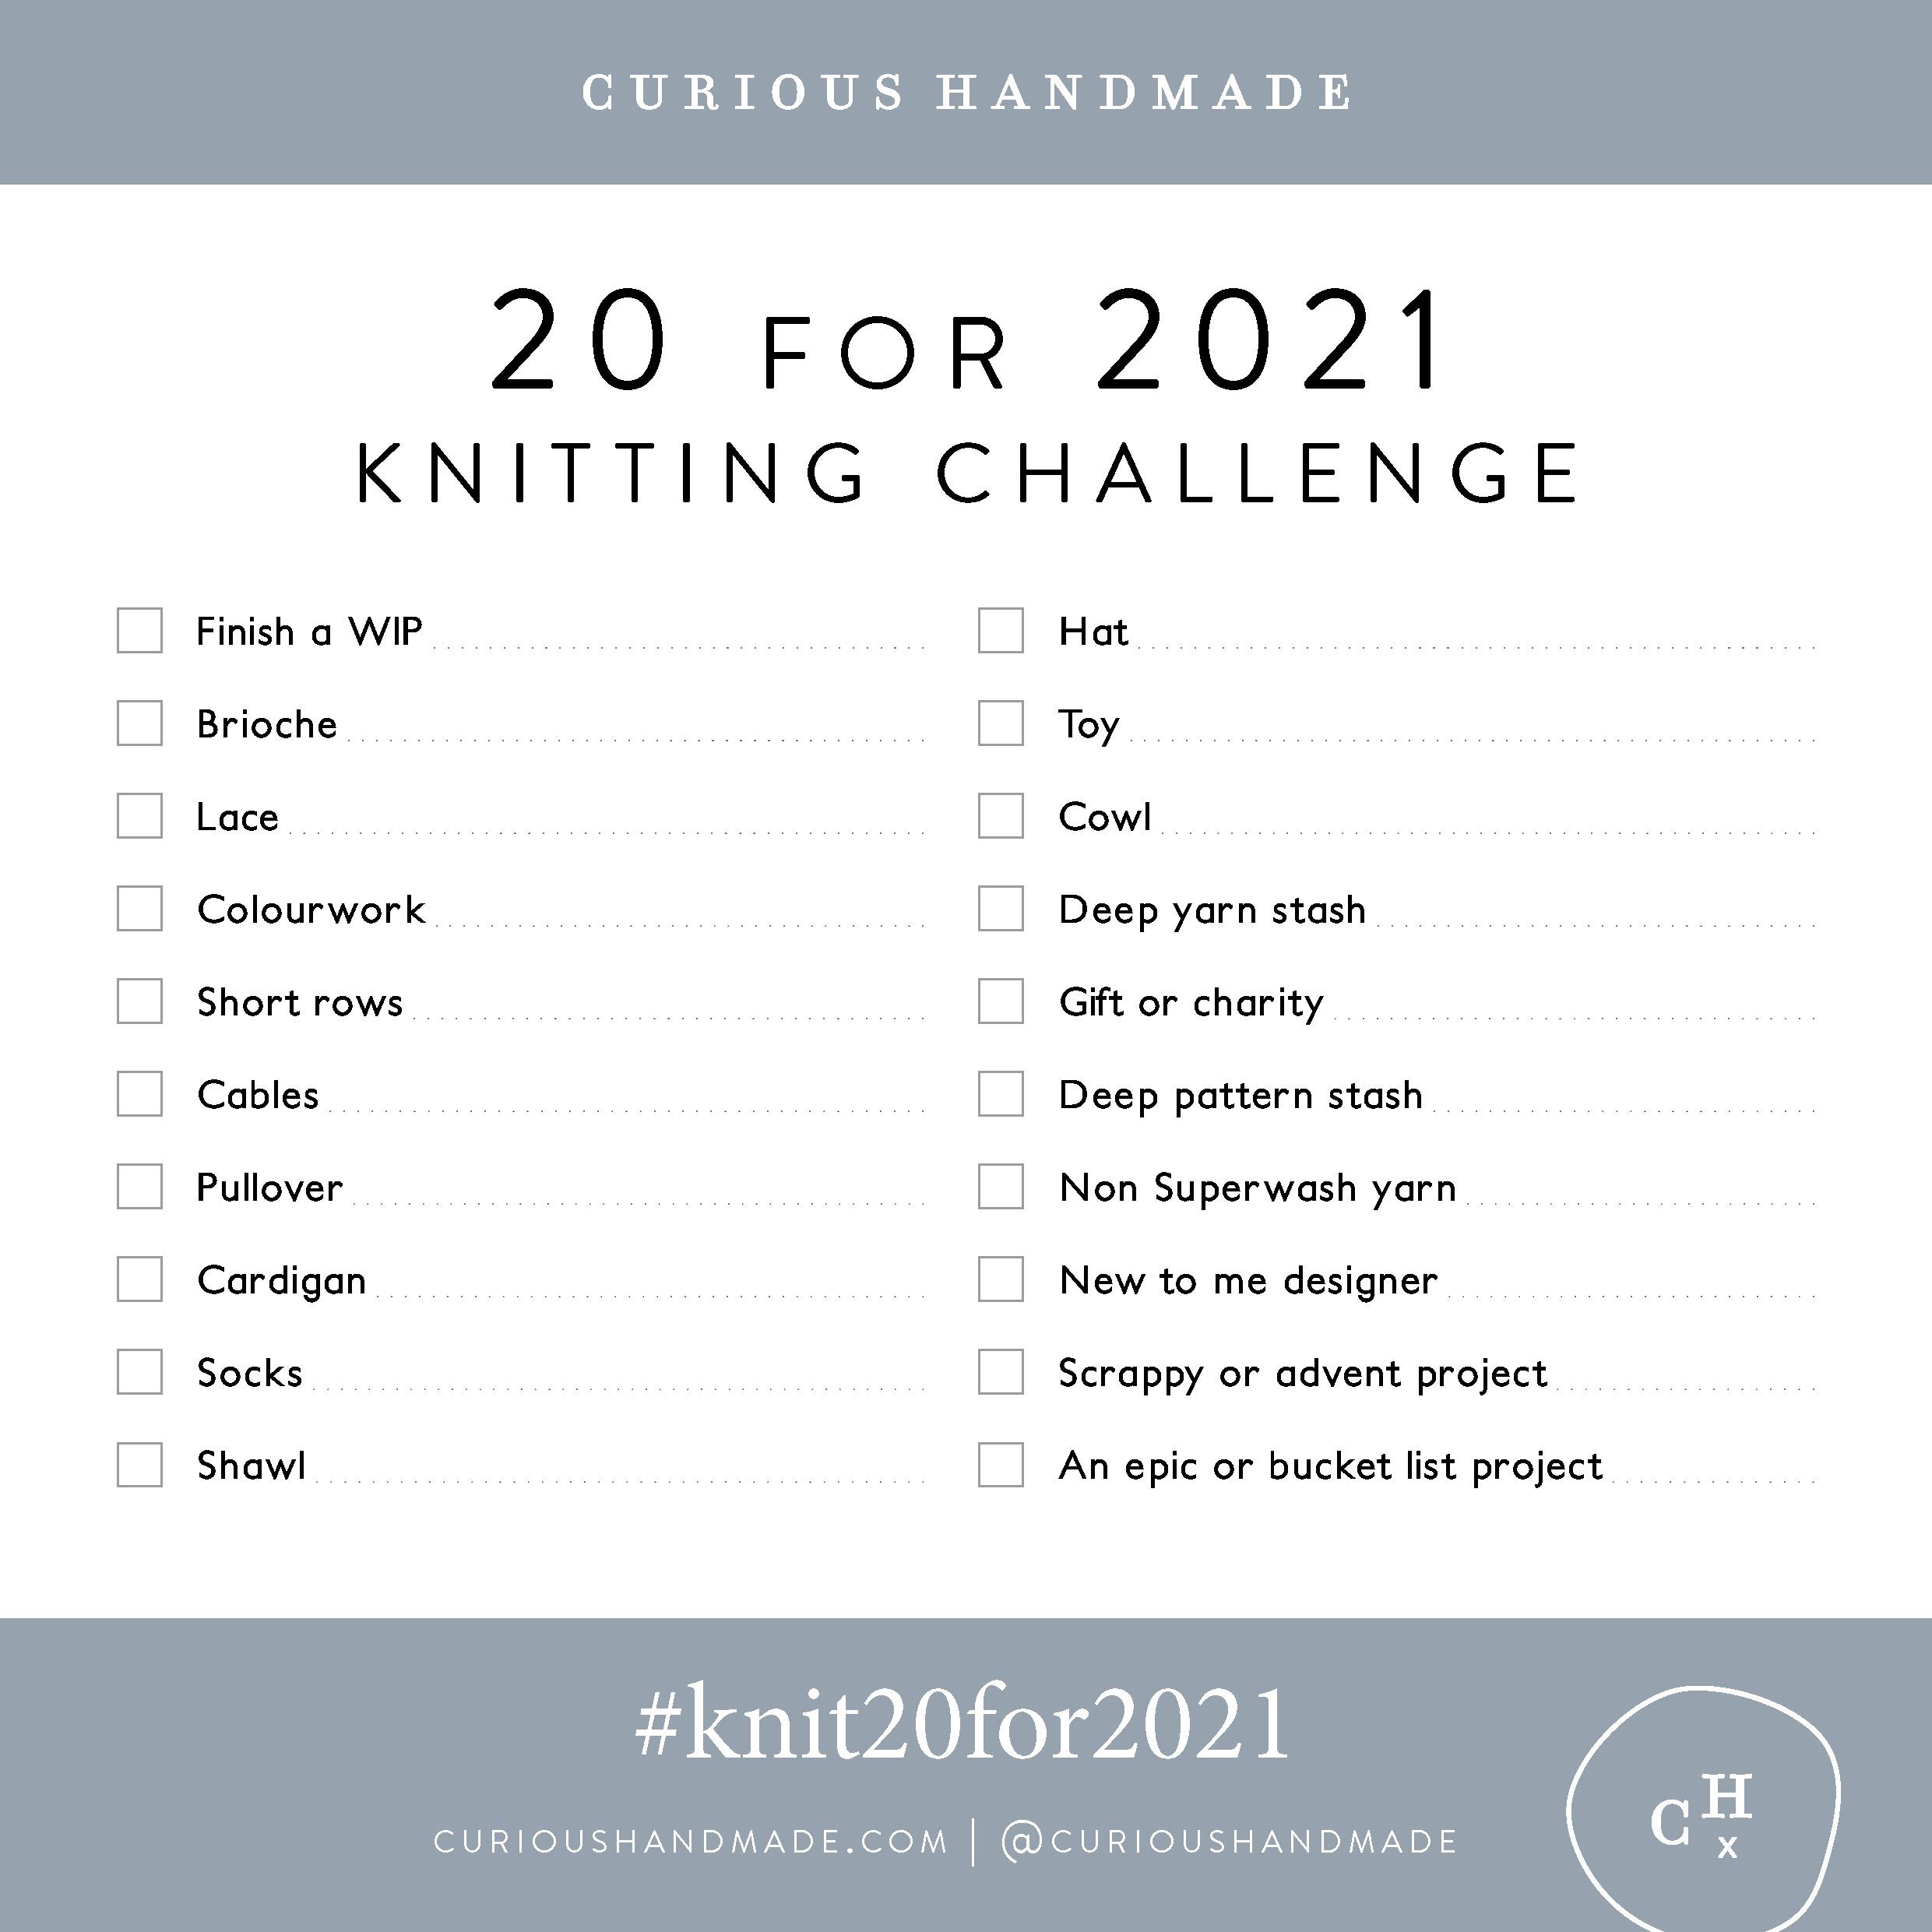 Knit20for2021 checklist by Helen Stewart of Curious Handmade